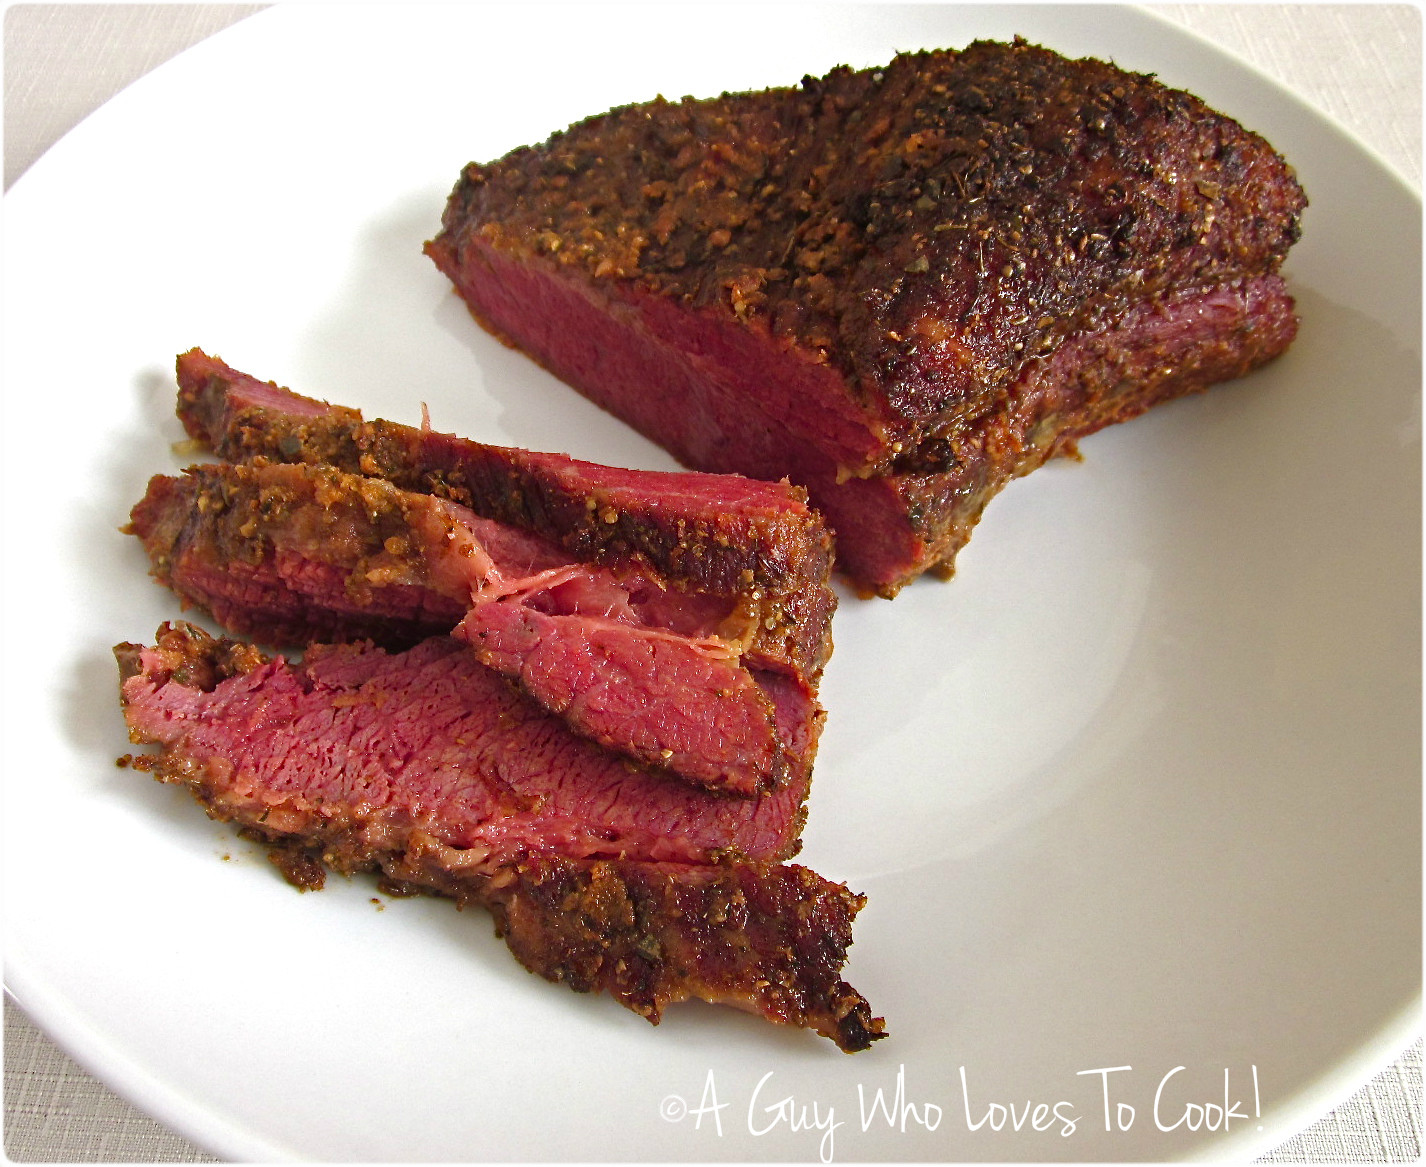 Cooking Corned Beef Brisket
 A Guy Who Loves to Cook Broasted Corned Beef Brisket